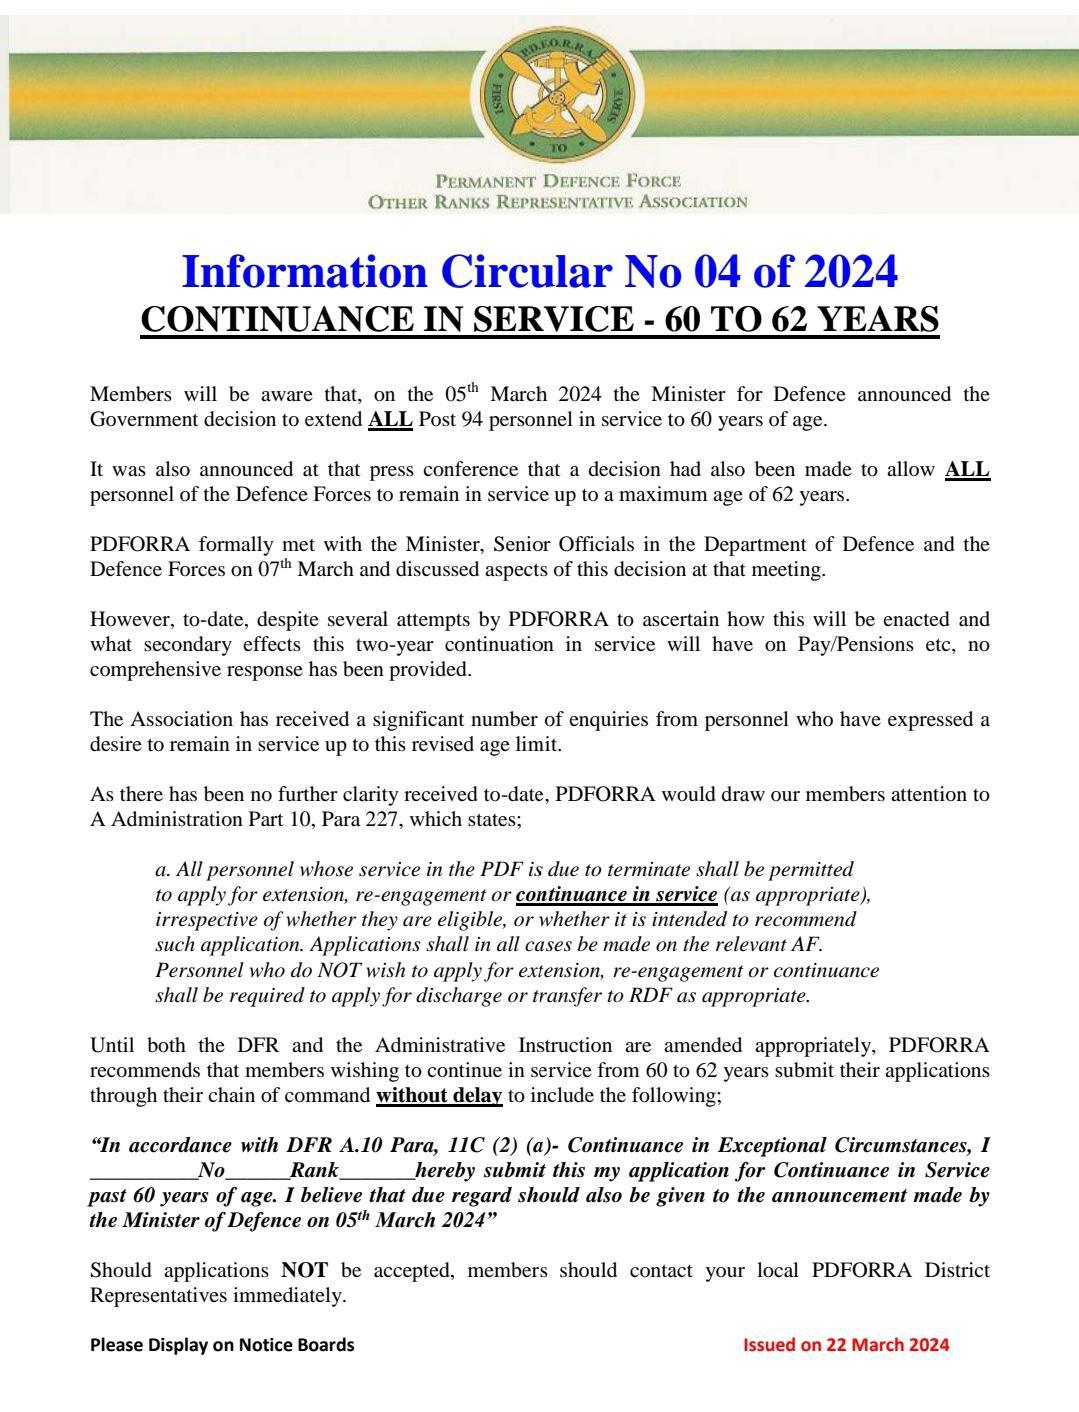 Information Circular No 04 of 2024 - Continuance in Service from 60 to 62